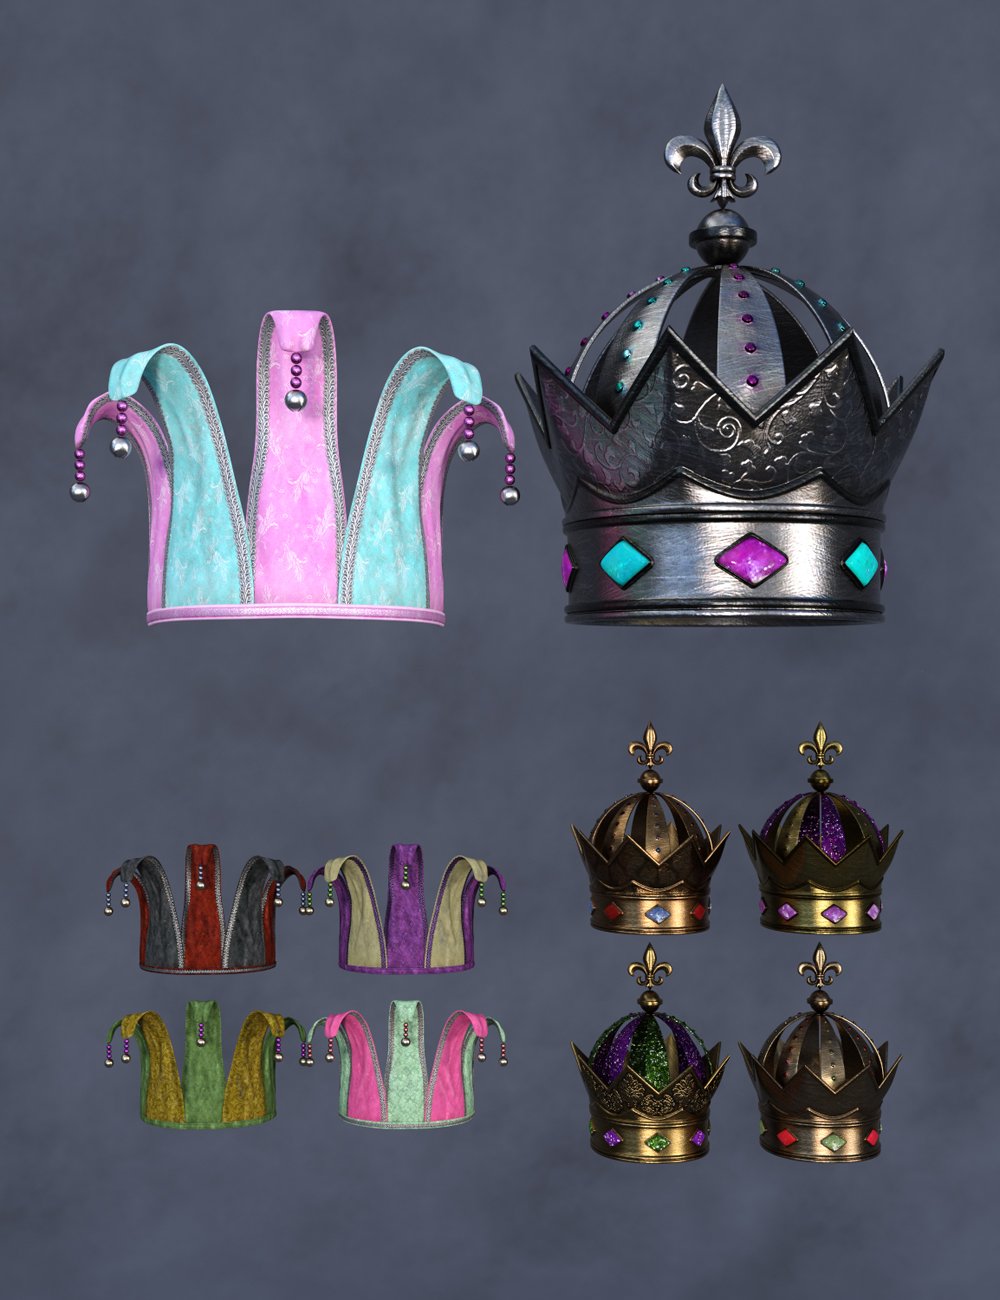 Fun Mardi Gras Mix and Match Crowns for Genesis 8 and 8.1 | Daz 3D